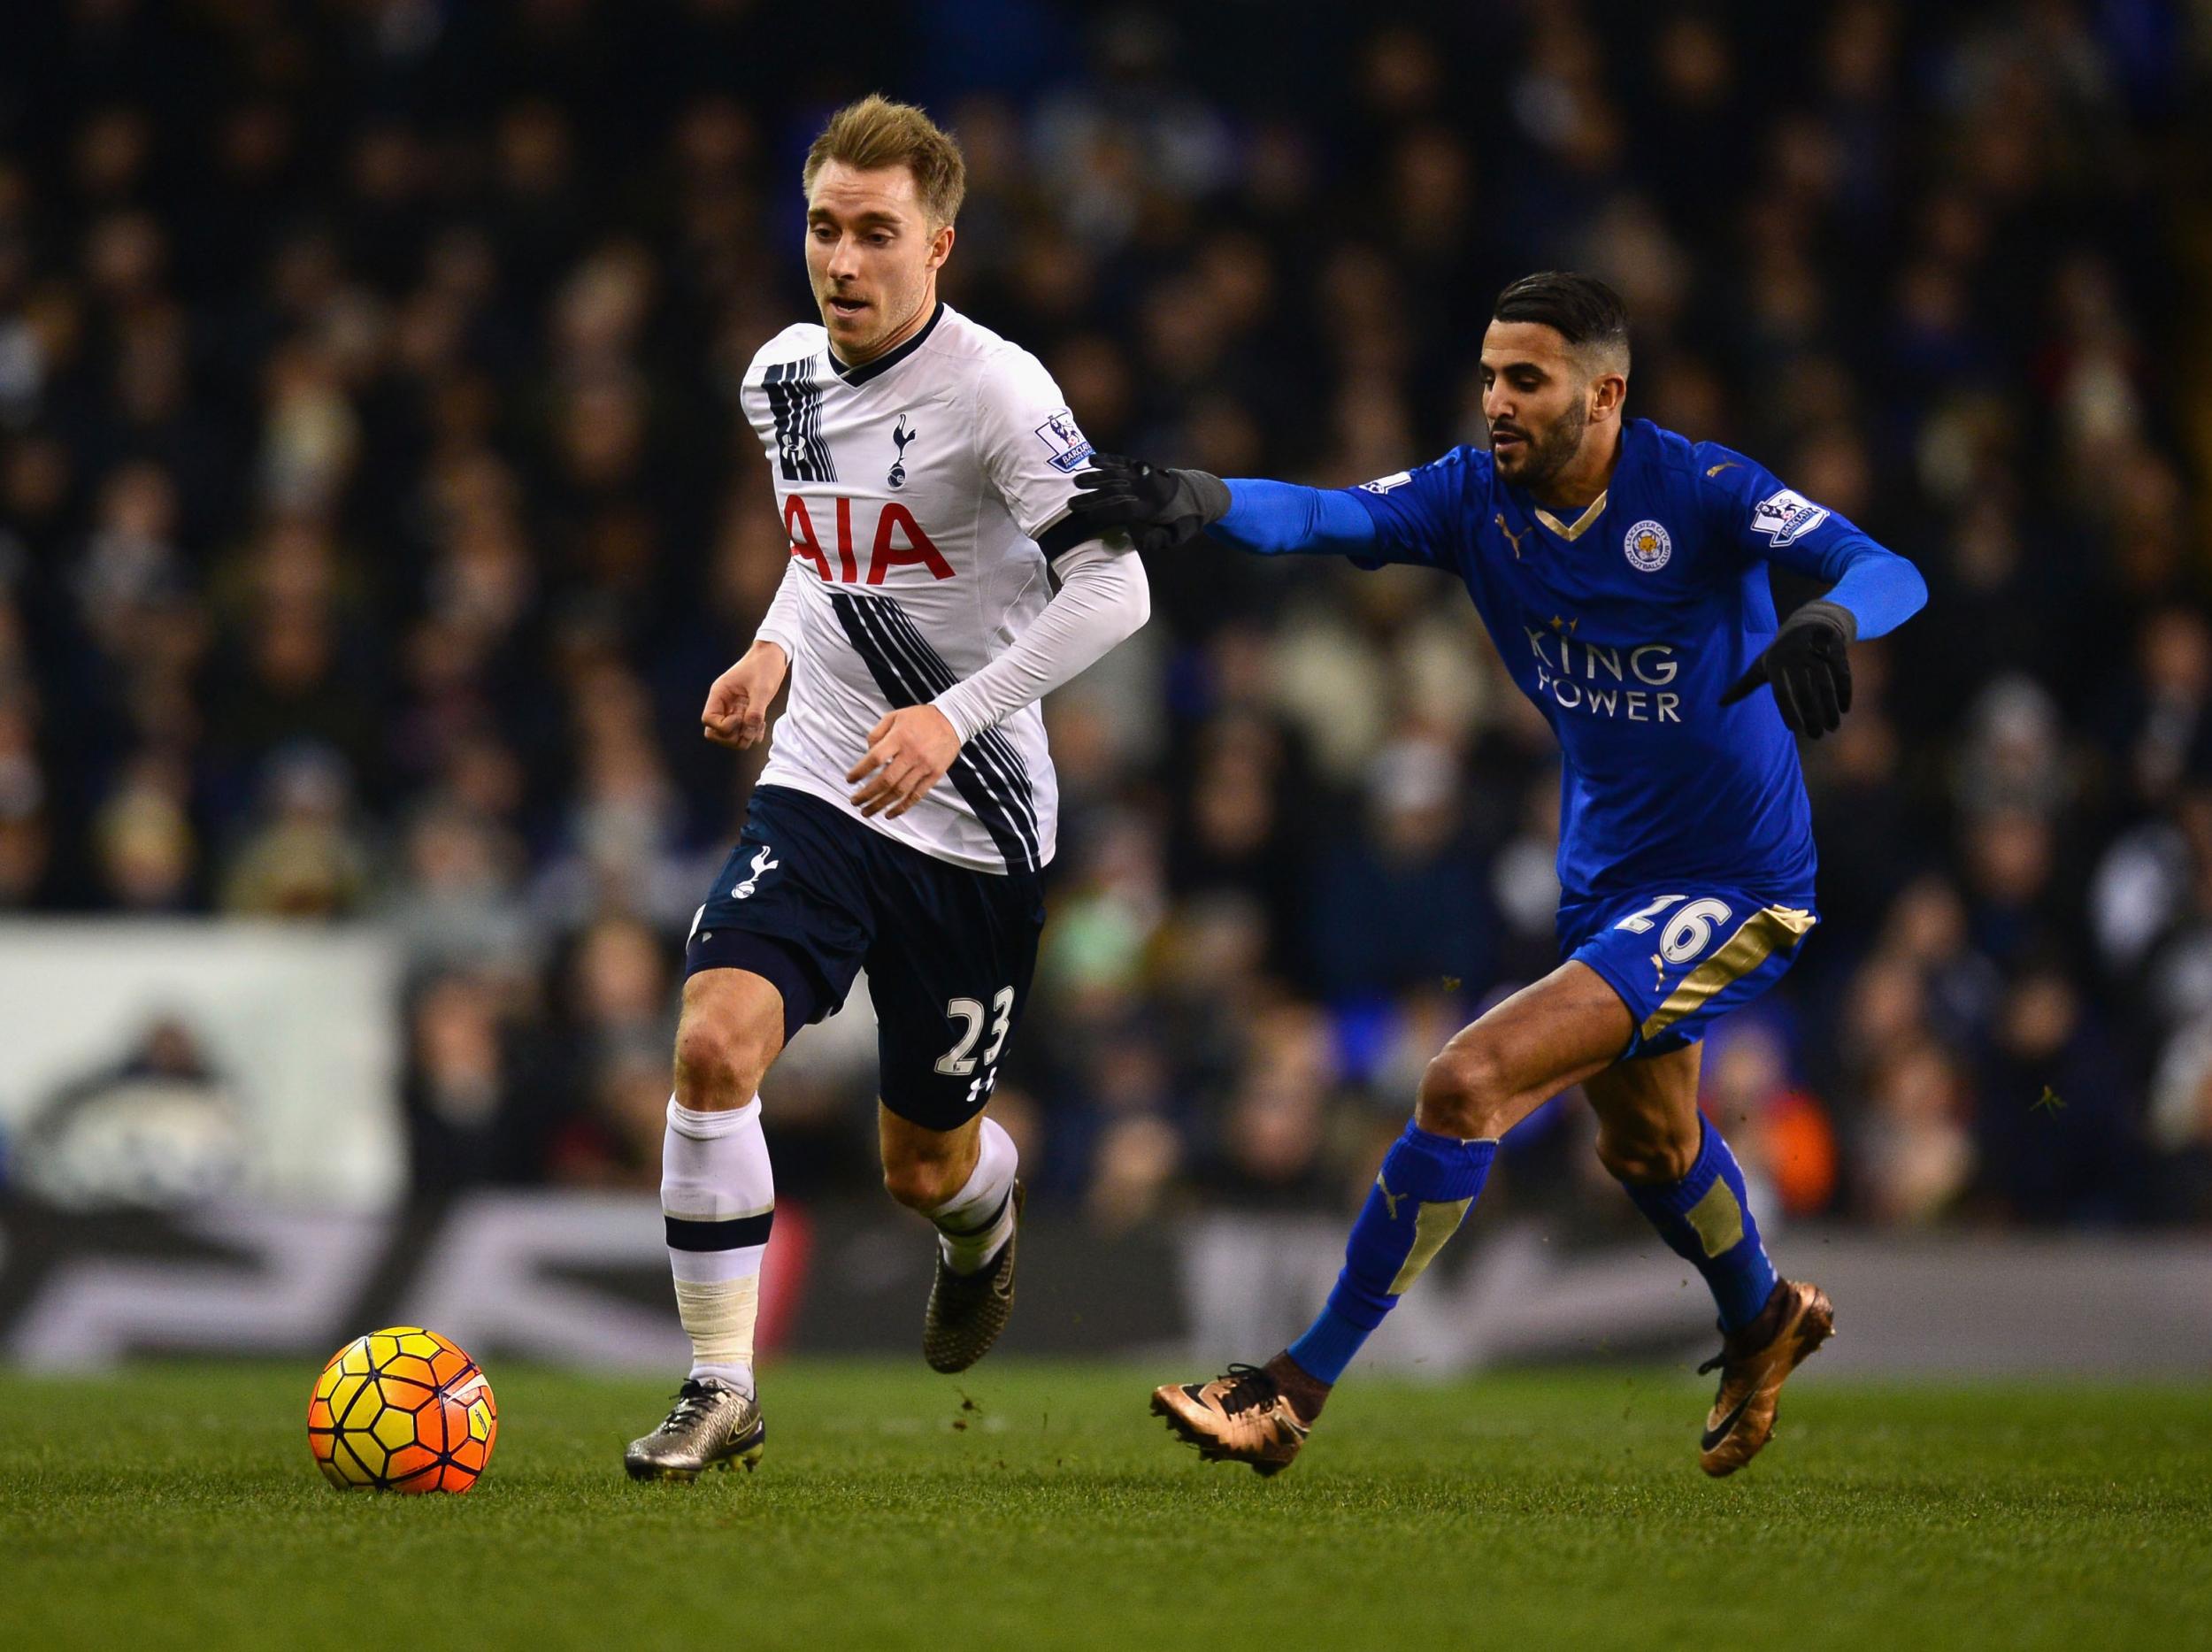 Spurs could rekindle their interest in Mahrez